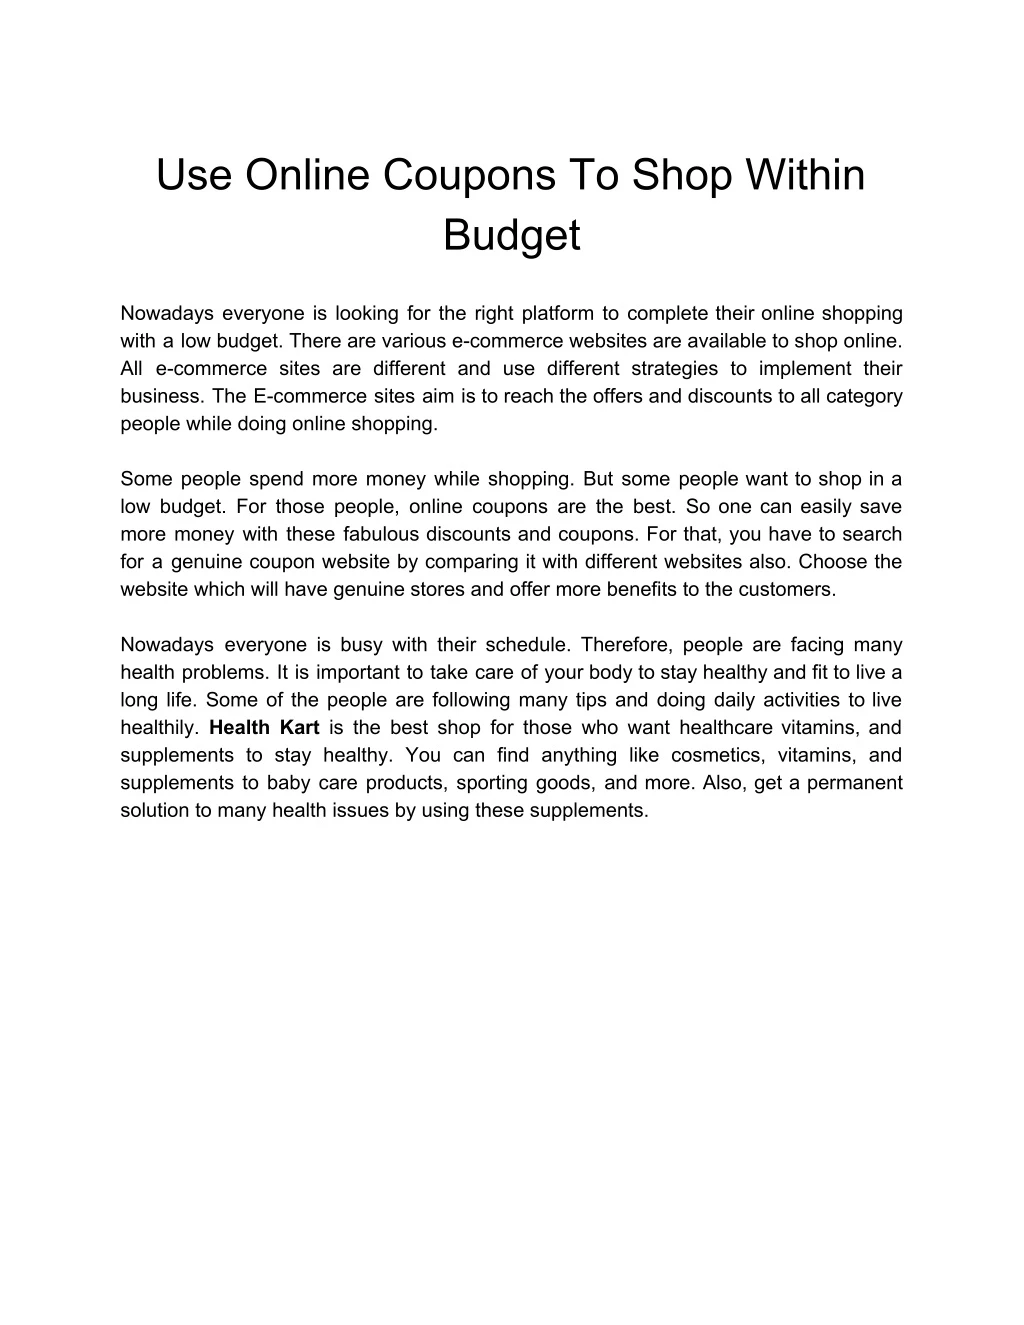 use online coupons to shop within budget